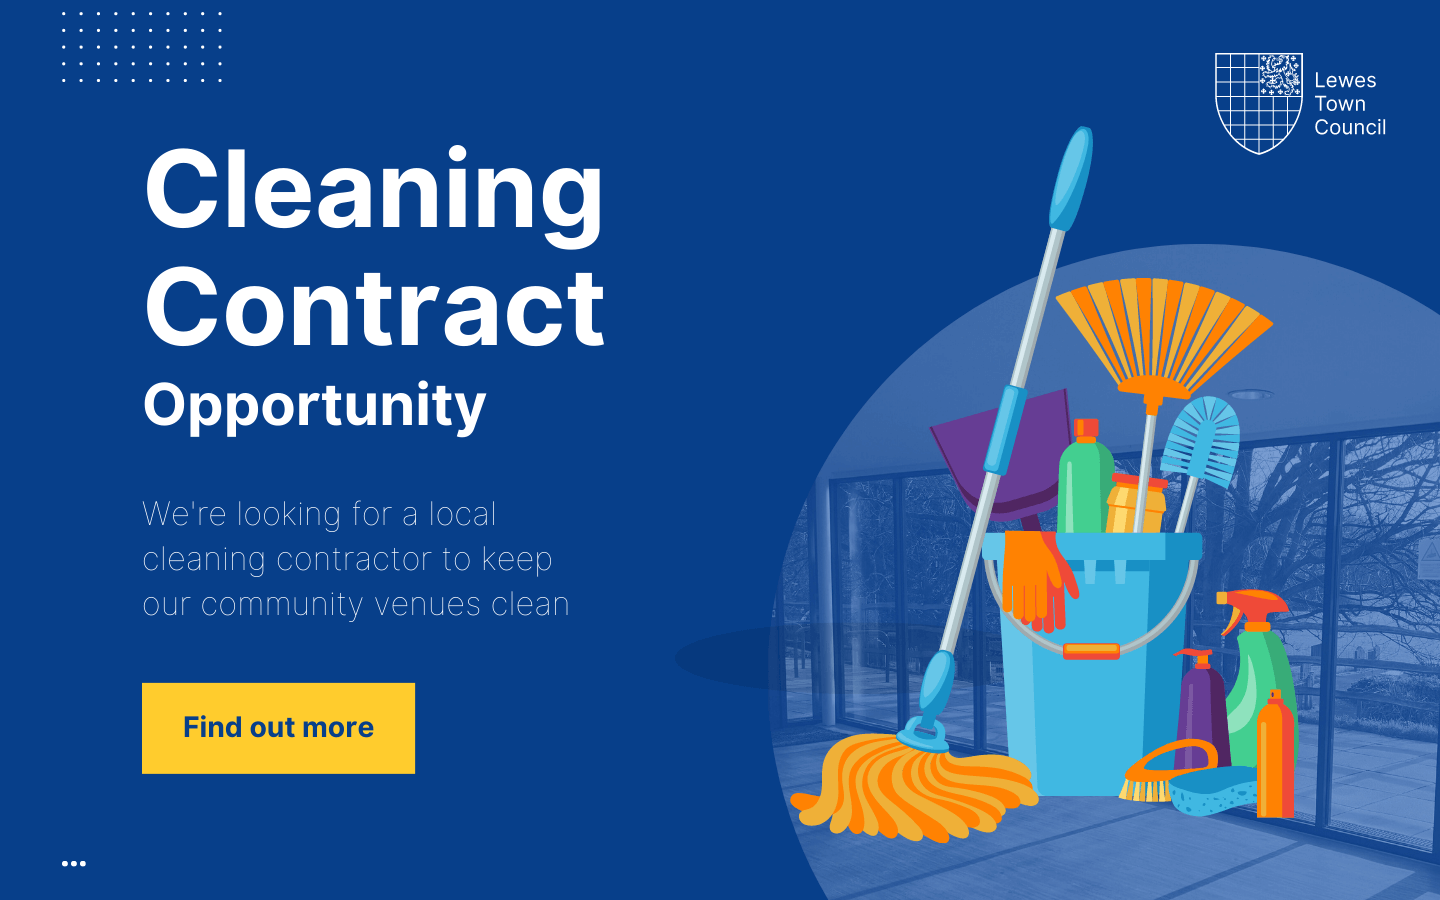 Cleaning Contract Opportunity - We're looking for a local cleaning contractor to keep our community venues clean